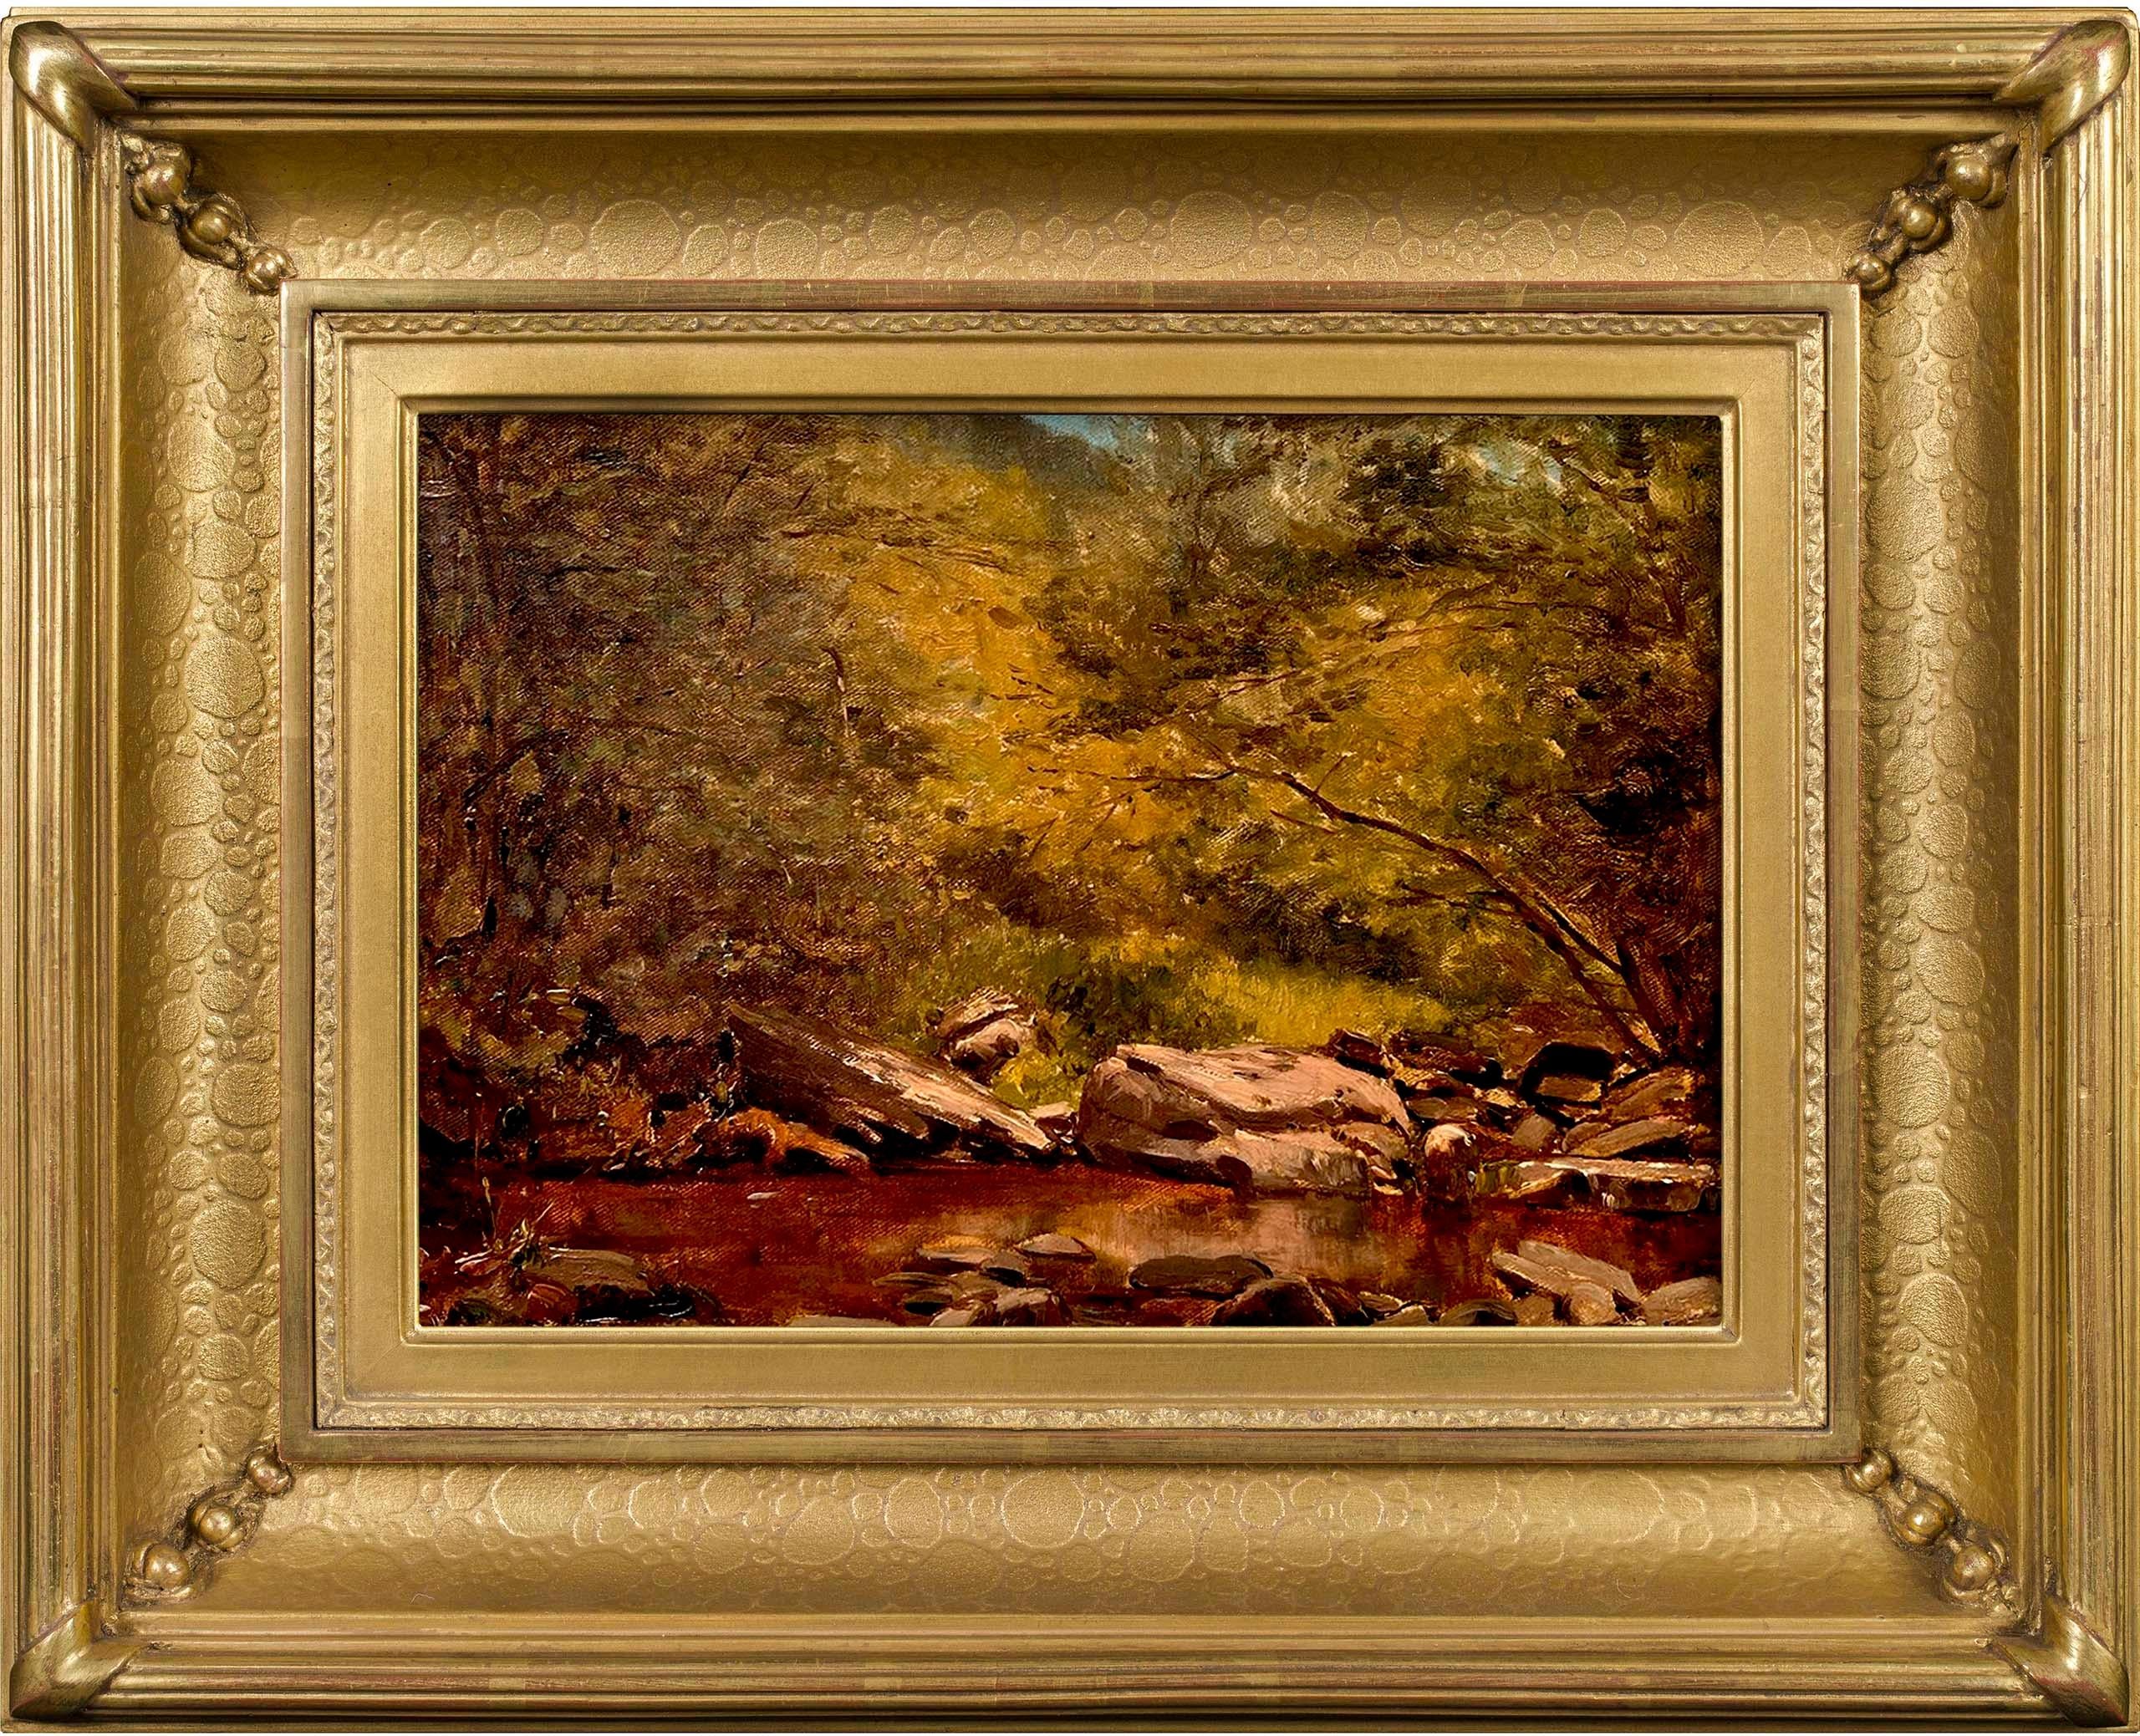 "Mink Hollow Brook," by Hudson River School artist Jervis McEntee (1828-1891) depicts the lush foliage, and rocky terrain  surrounding a Catskill brook. This 19th century oil painting on canvas measures 11 x 15.25 inches and is signed by the artist